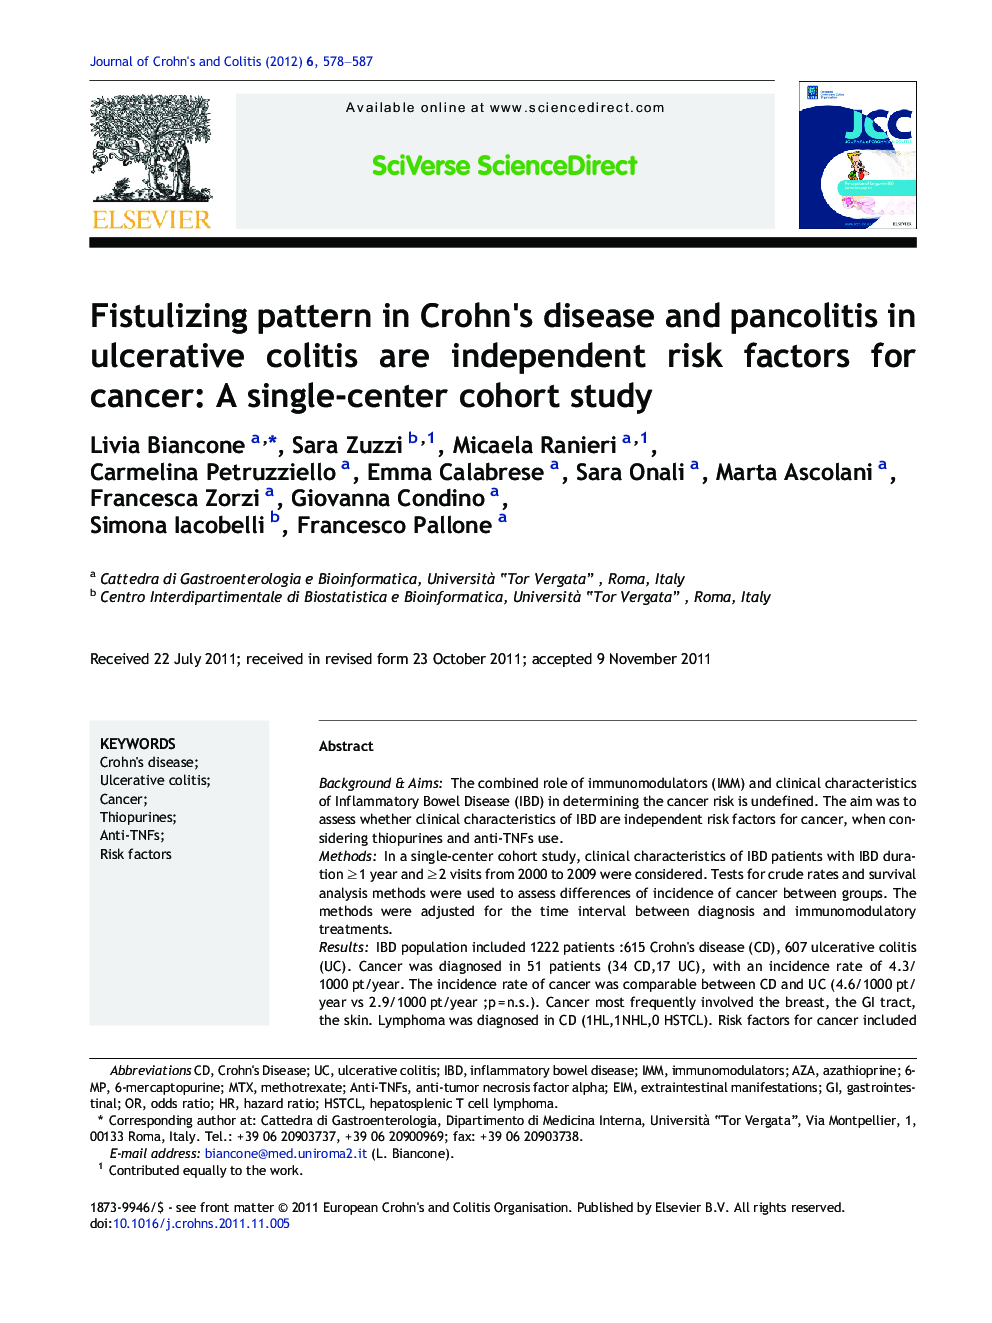 Fistulizing pattern in Crohn's disease and pancolitis in ulcerative colitis are independent risk factors for cancer: A single-center cohort study